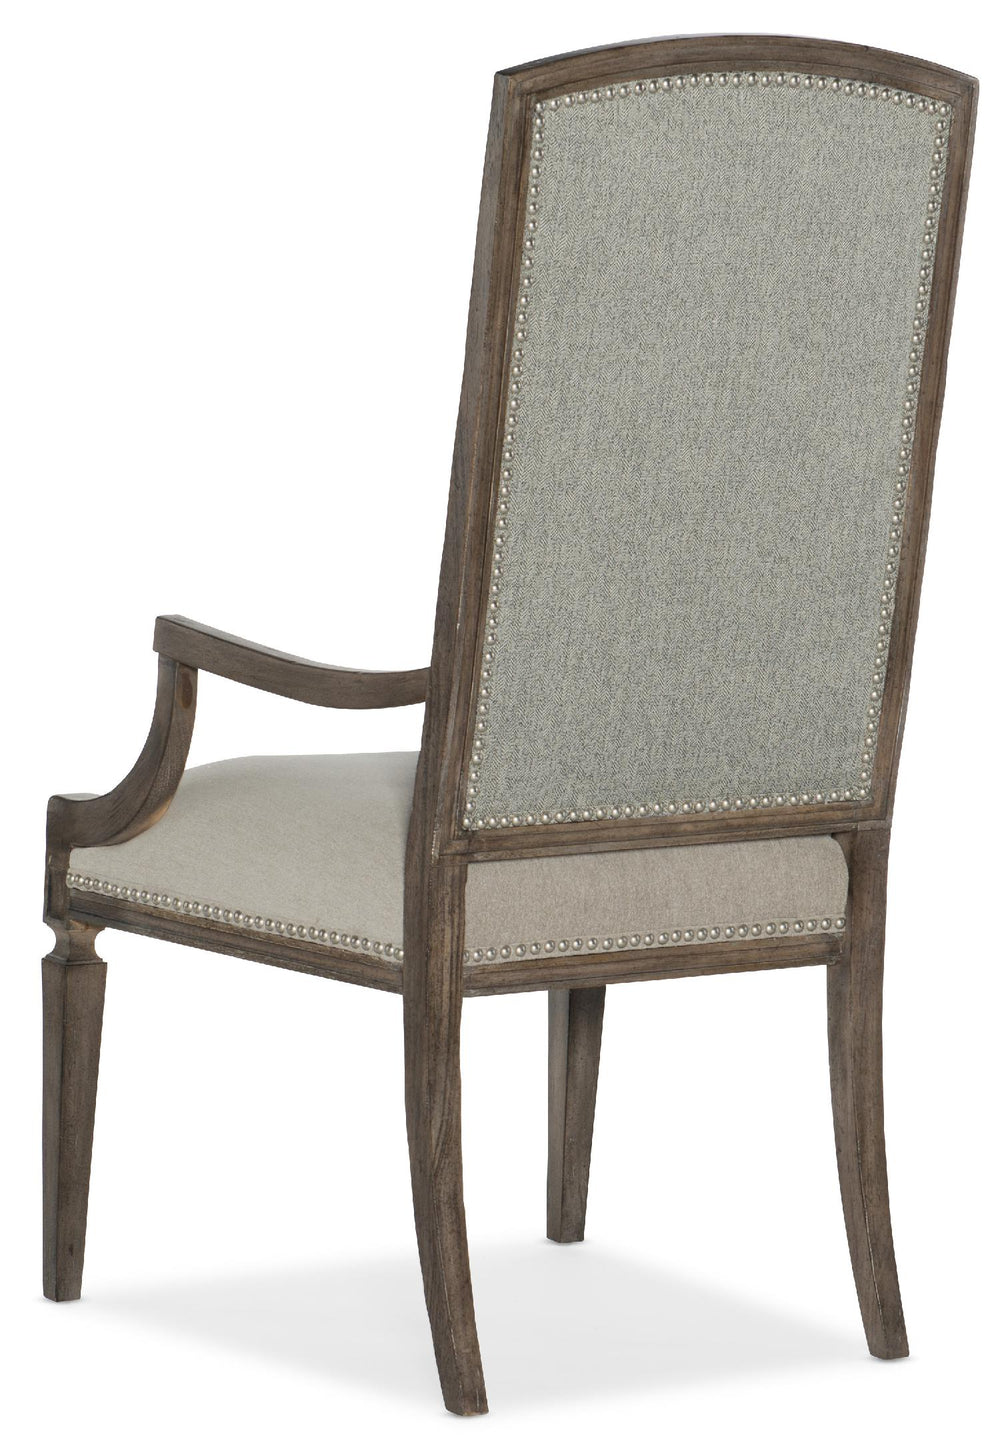 American Home Furniture | Hooker Furniture - Woodlands Arched Upholstered Arm Chair - Set of 2